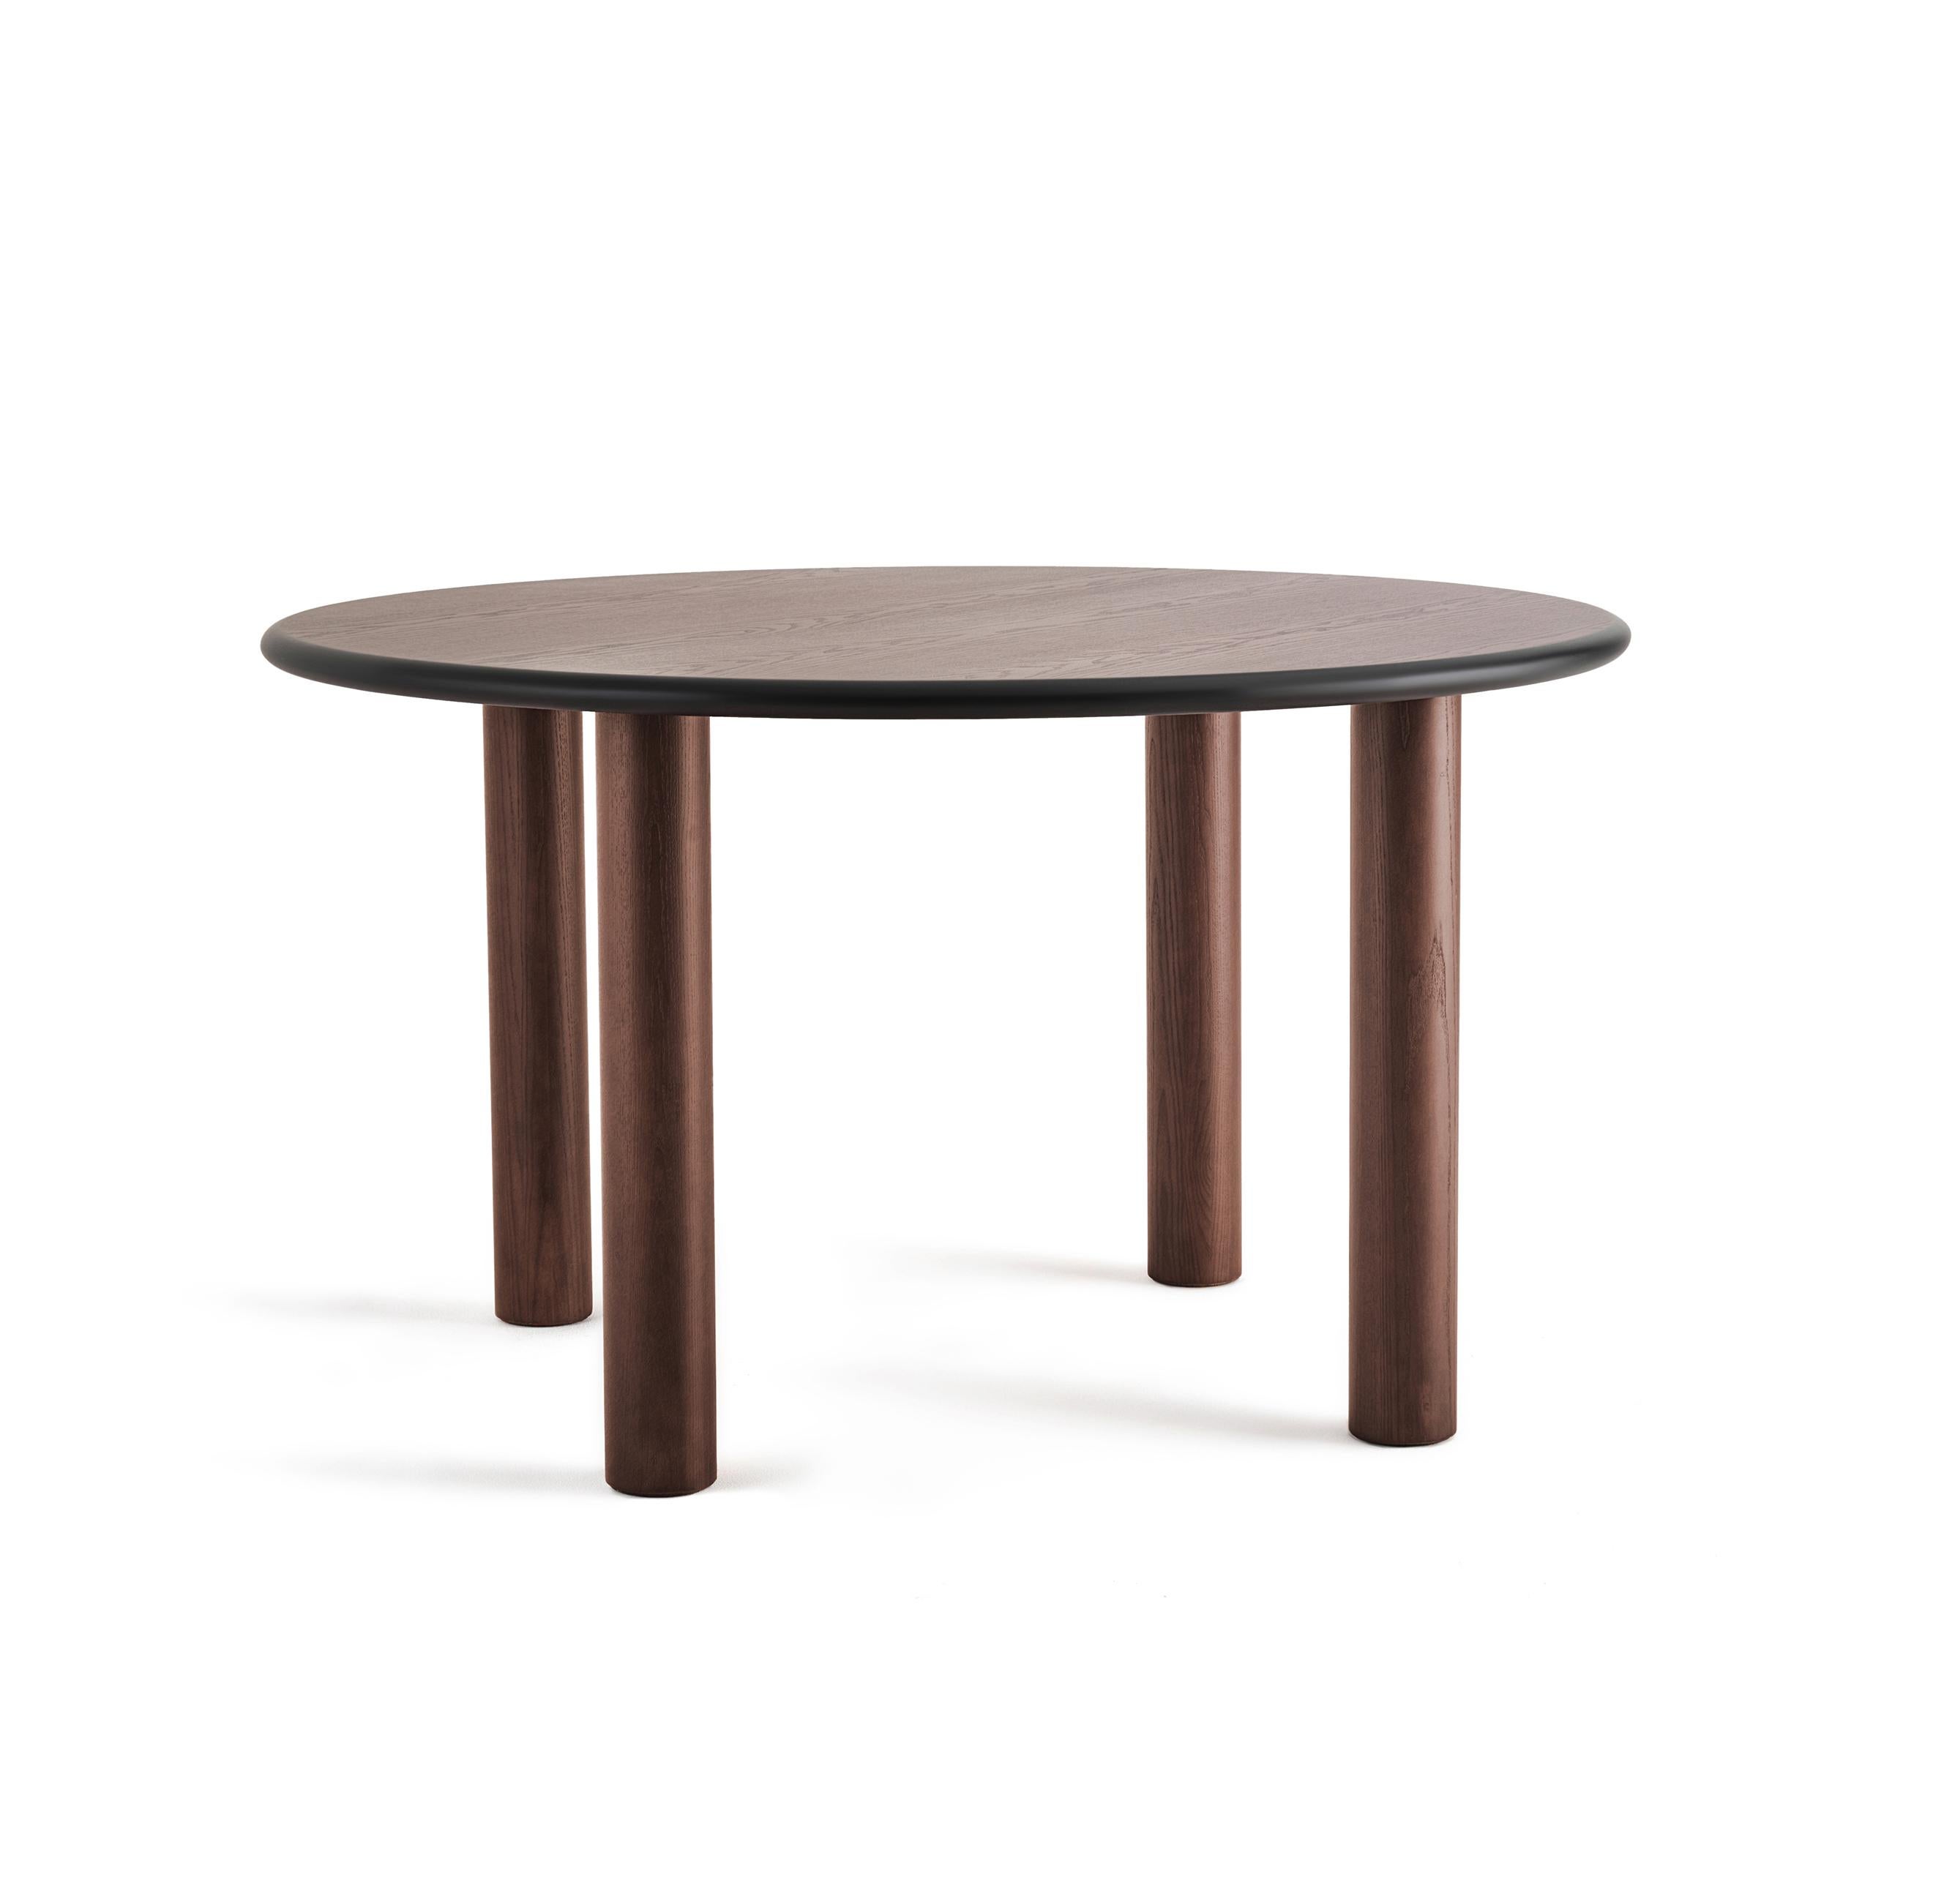 Organic Modern Contemporary Dining Round Table 'Paul' by Noom, Brown Stained, 130 cm For Sale